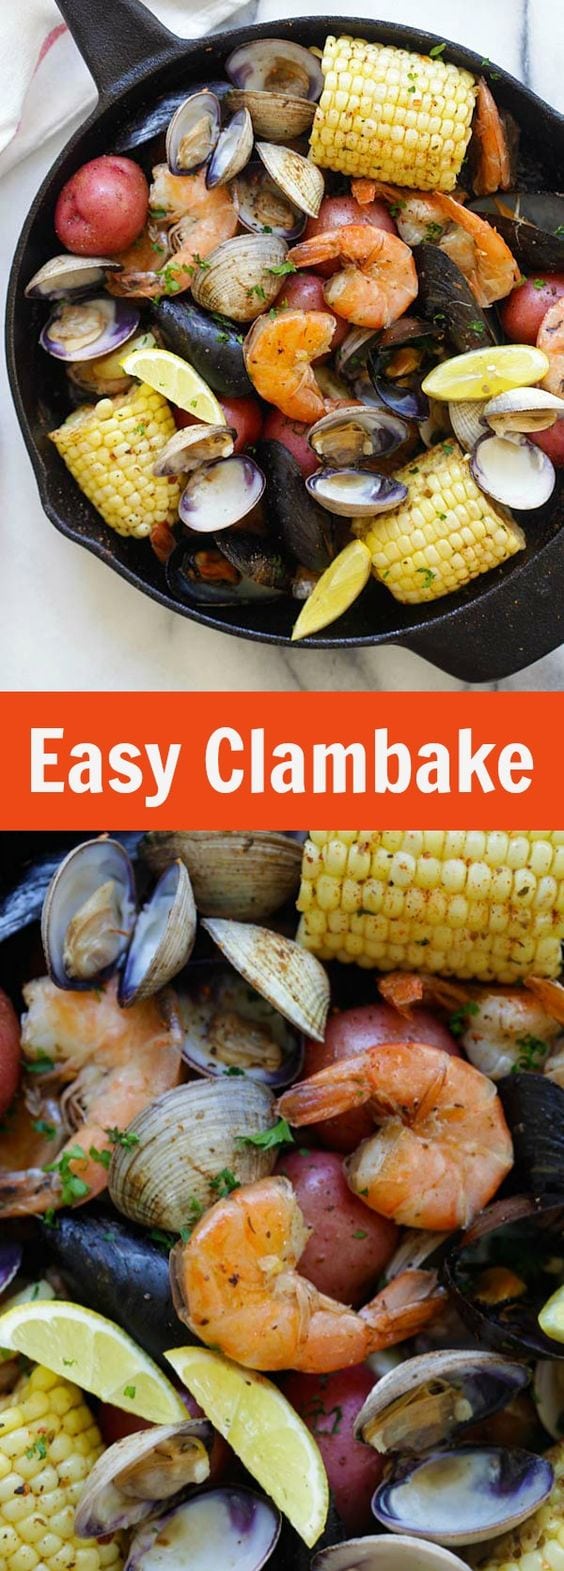 Clambake - the easiest and no-fuss clambake recipe ever, cooked on a stovetop with a skillet. Fresh, delicious and perfect for summer | rasamalaysia.com